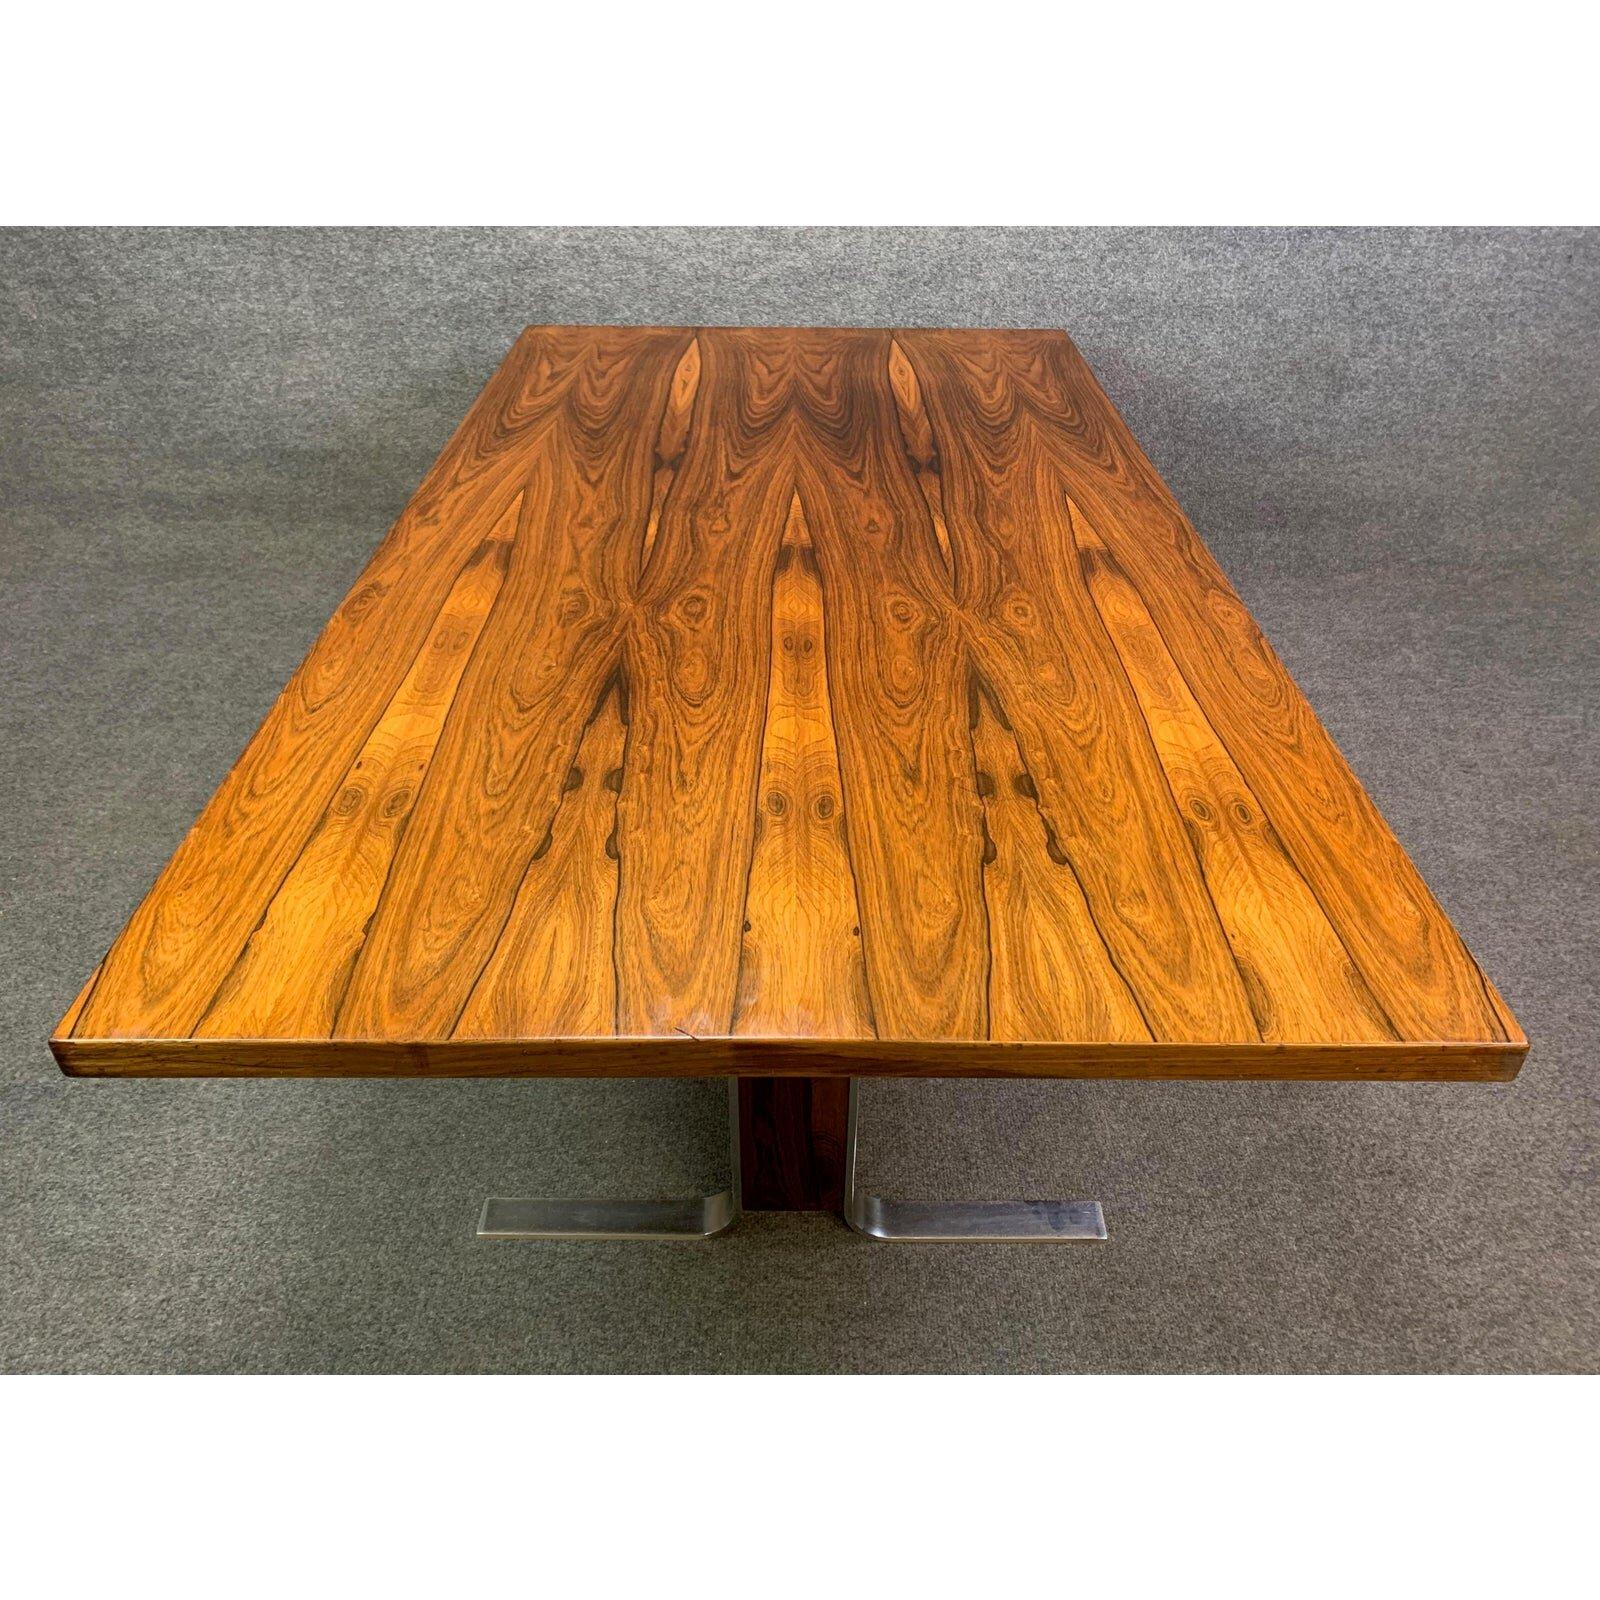 Vintage Danish Mid-Century Modern Rosewood and Chrome Large Coffee Table In Good Condition For Sale In San Marcos, CA